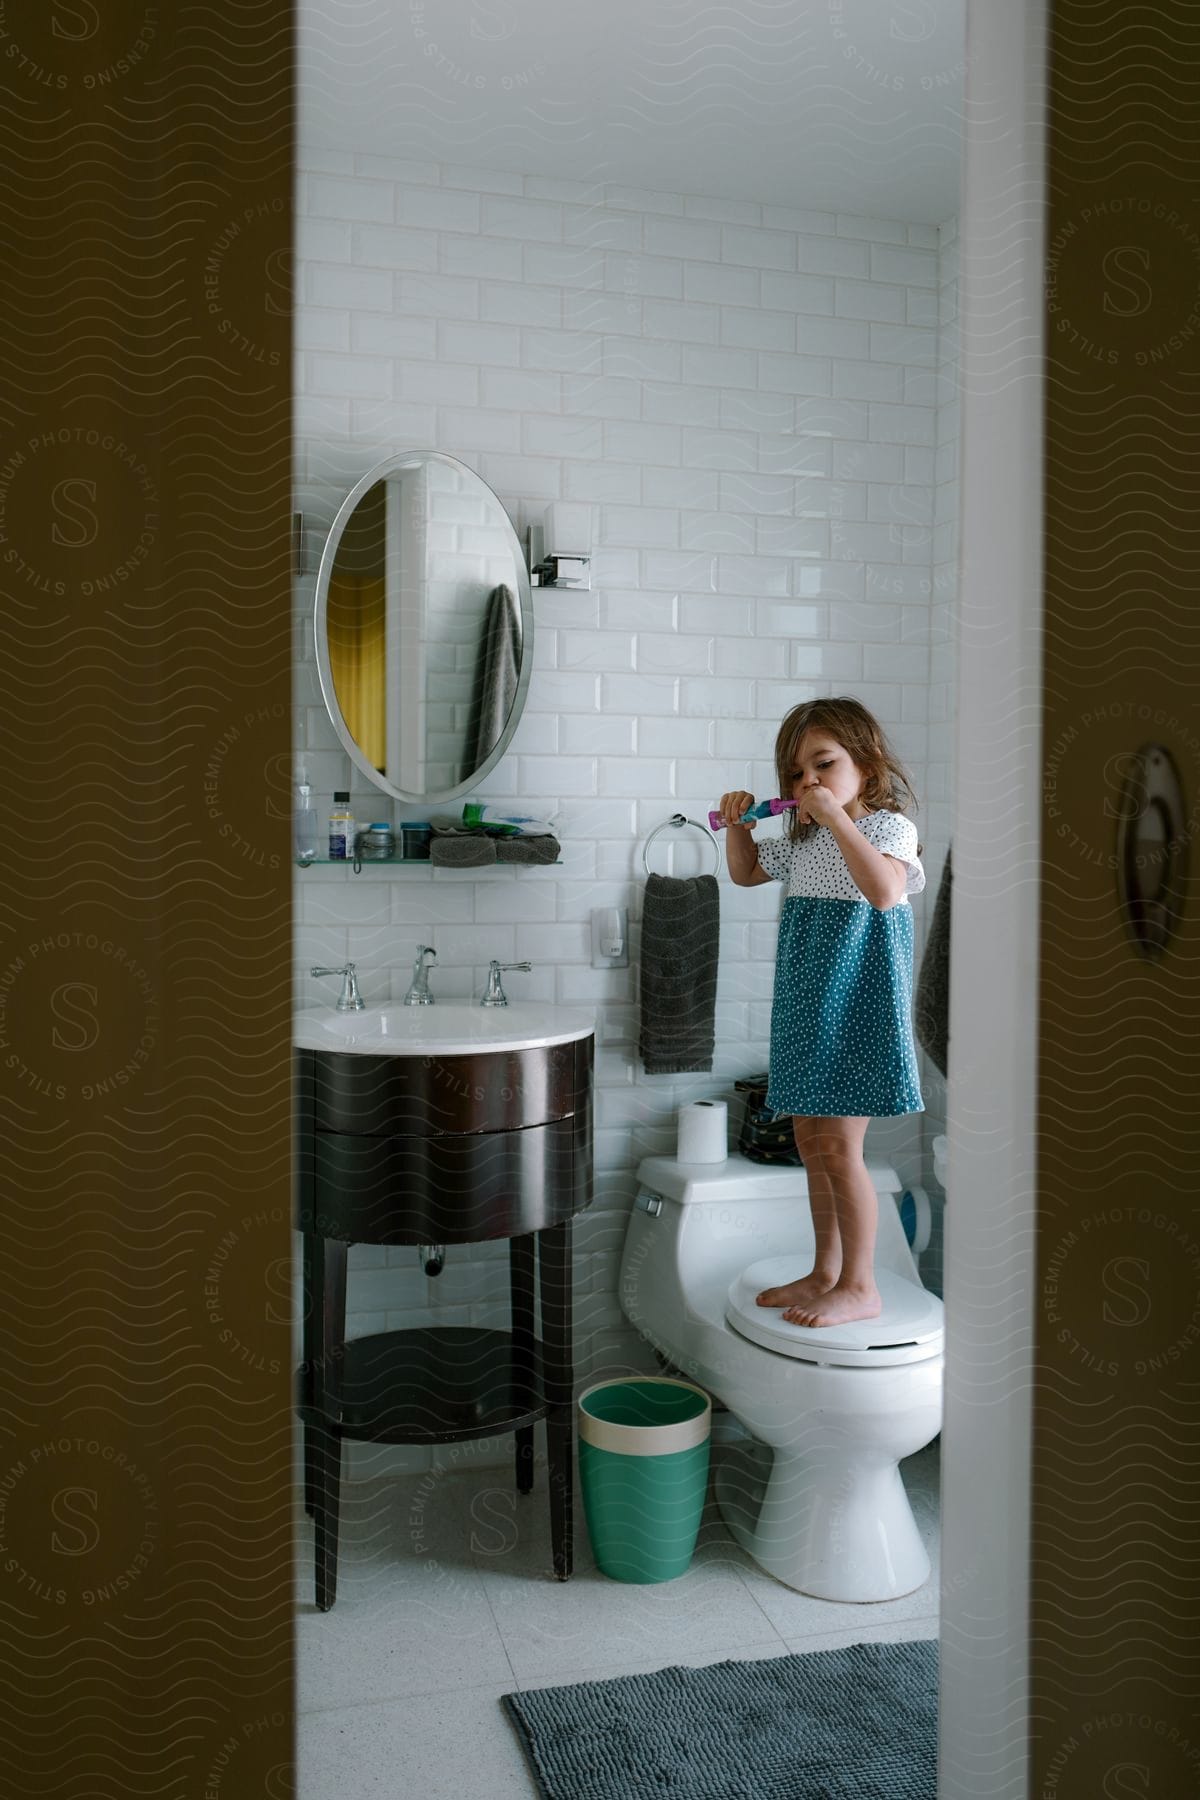 A little girl wearing a dress is standing on the toilet near the bathroom mirror